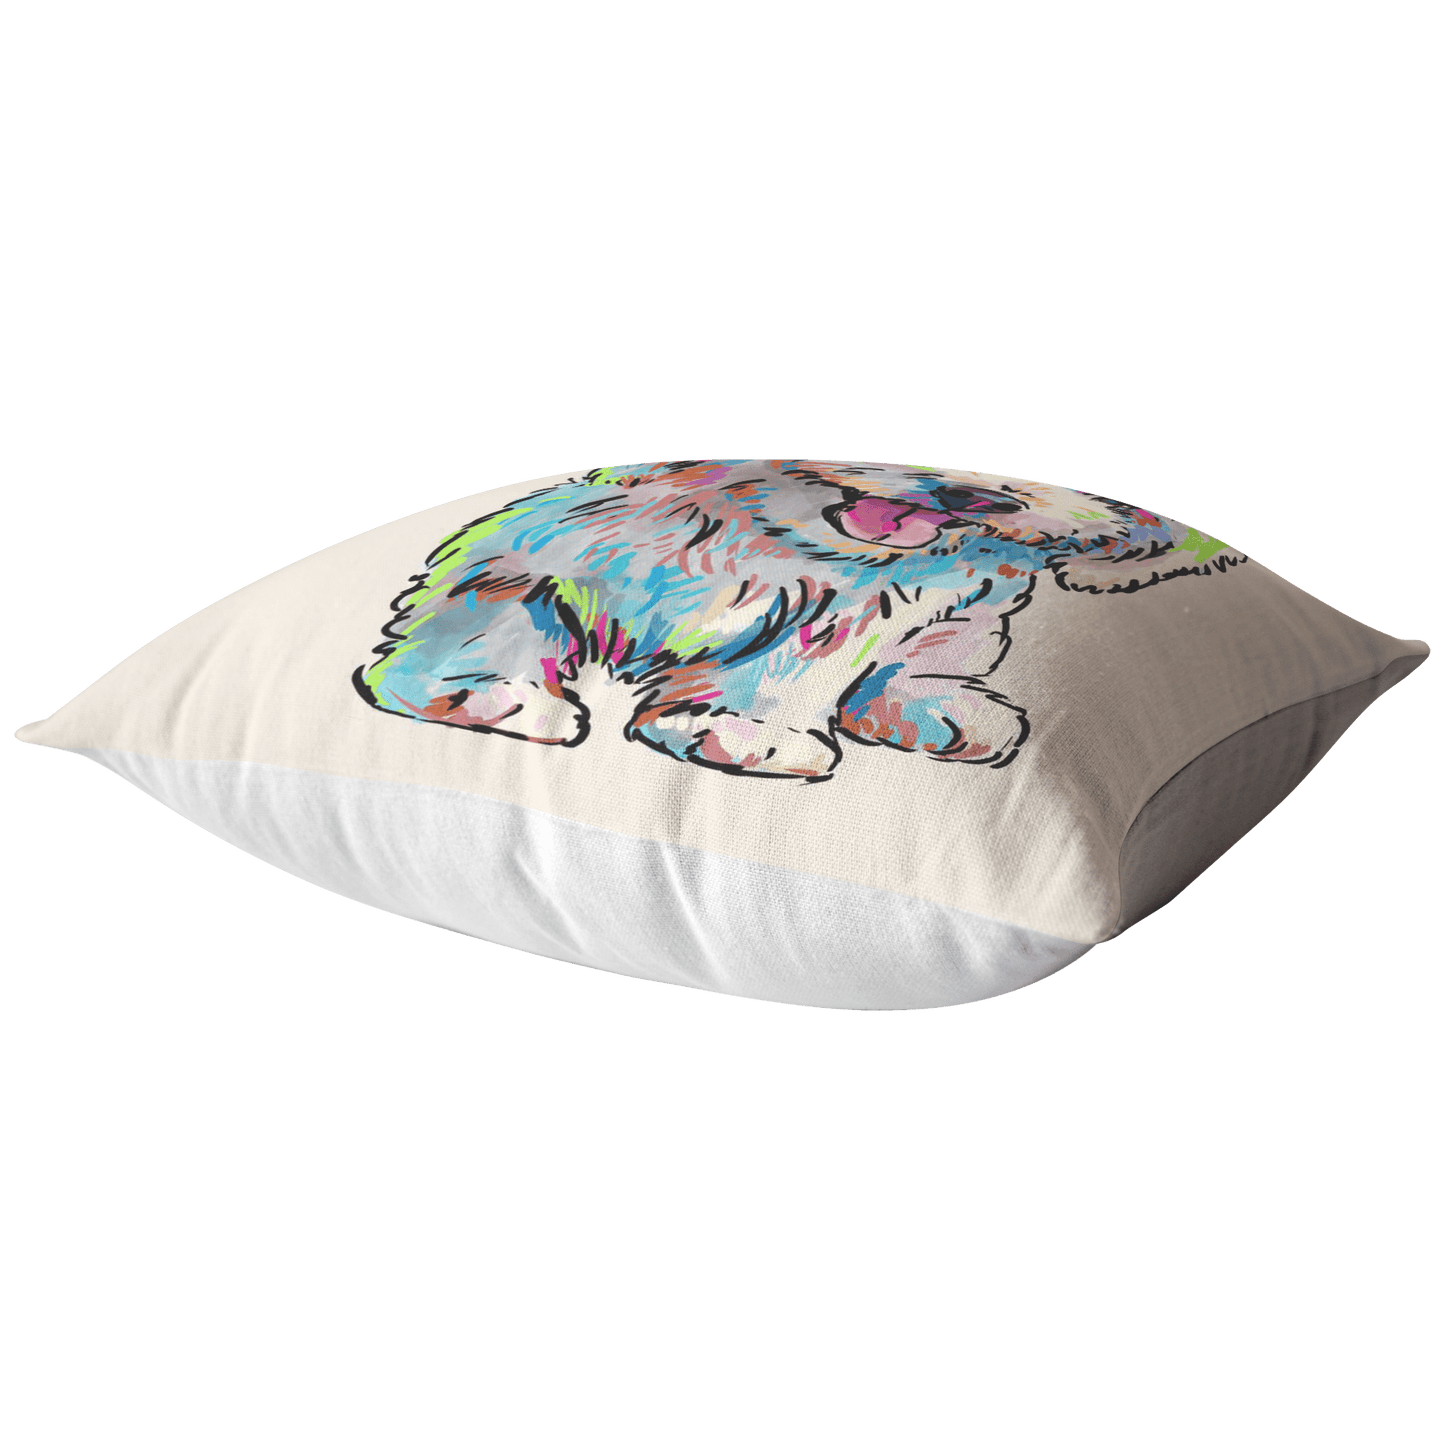 Bichon Frise Pillow Cover Only One Sided Print, No Insert Included, No Home is Complete Without a Bichon Frise,